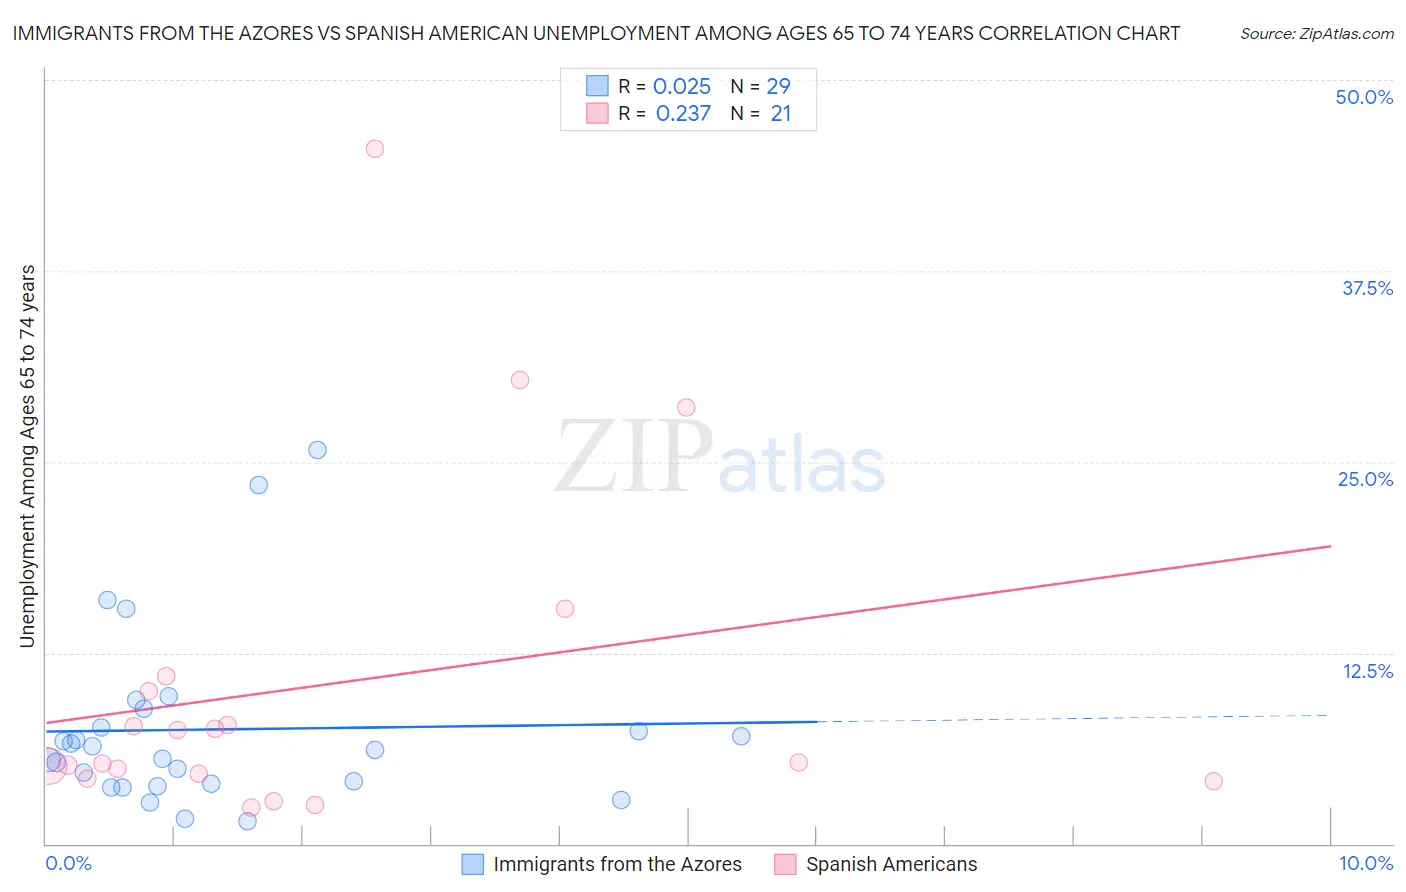 Immigrants from the Azores vs Spanish American Unemployment Among Ages 65 to 74 years